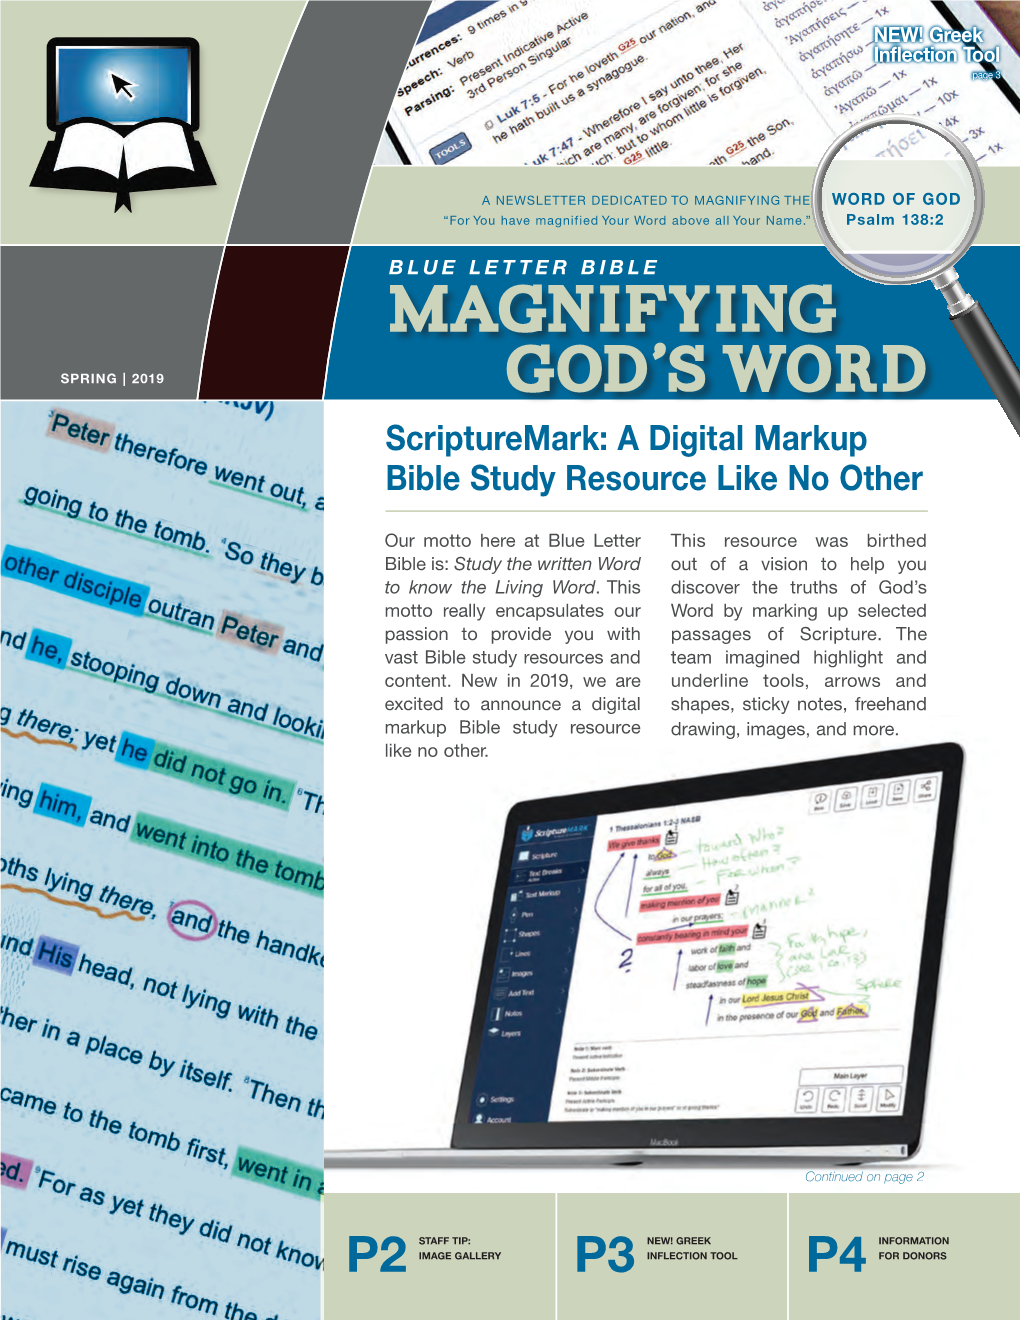 Magnifying GOD's WORD